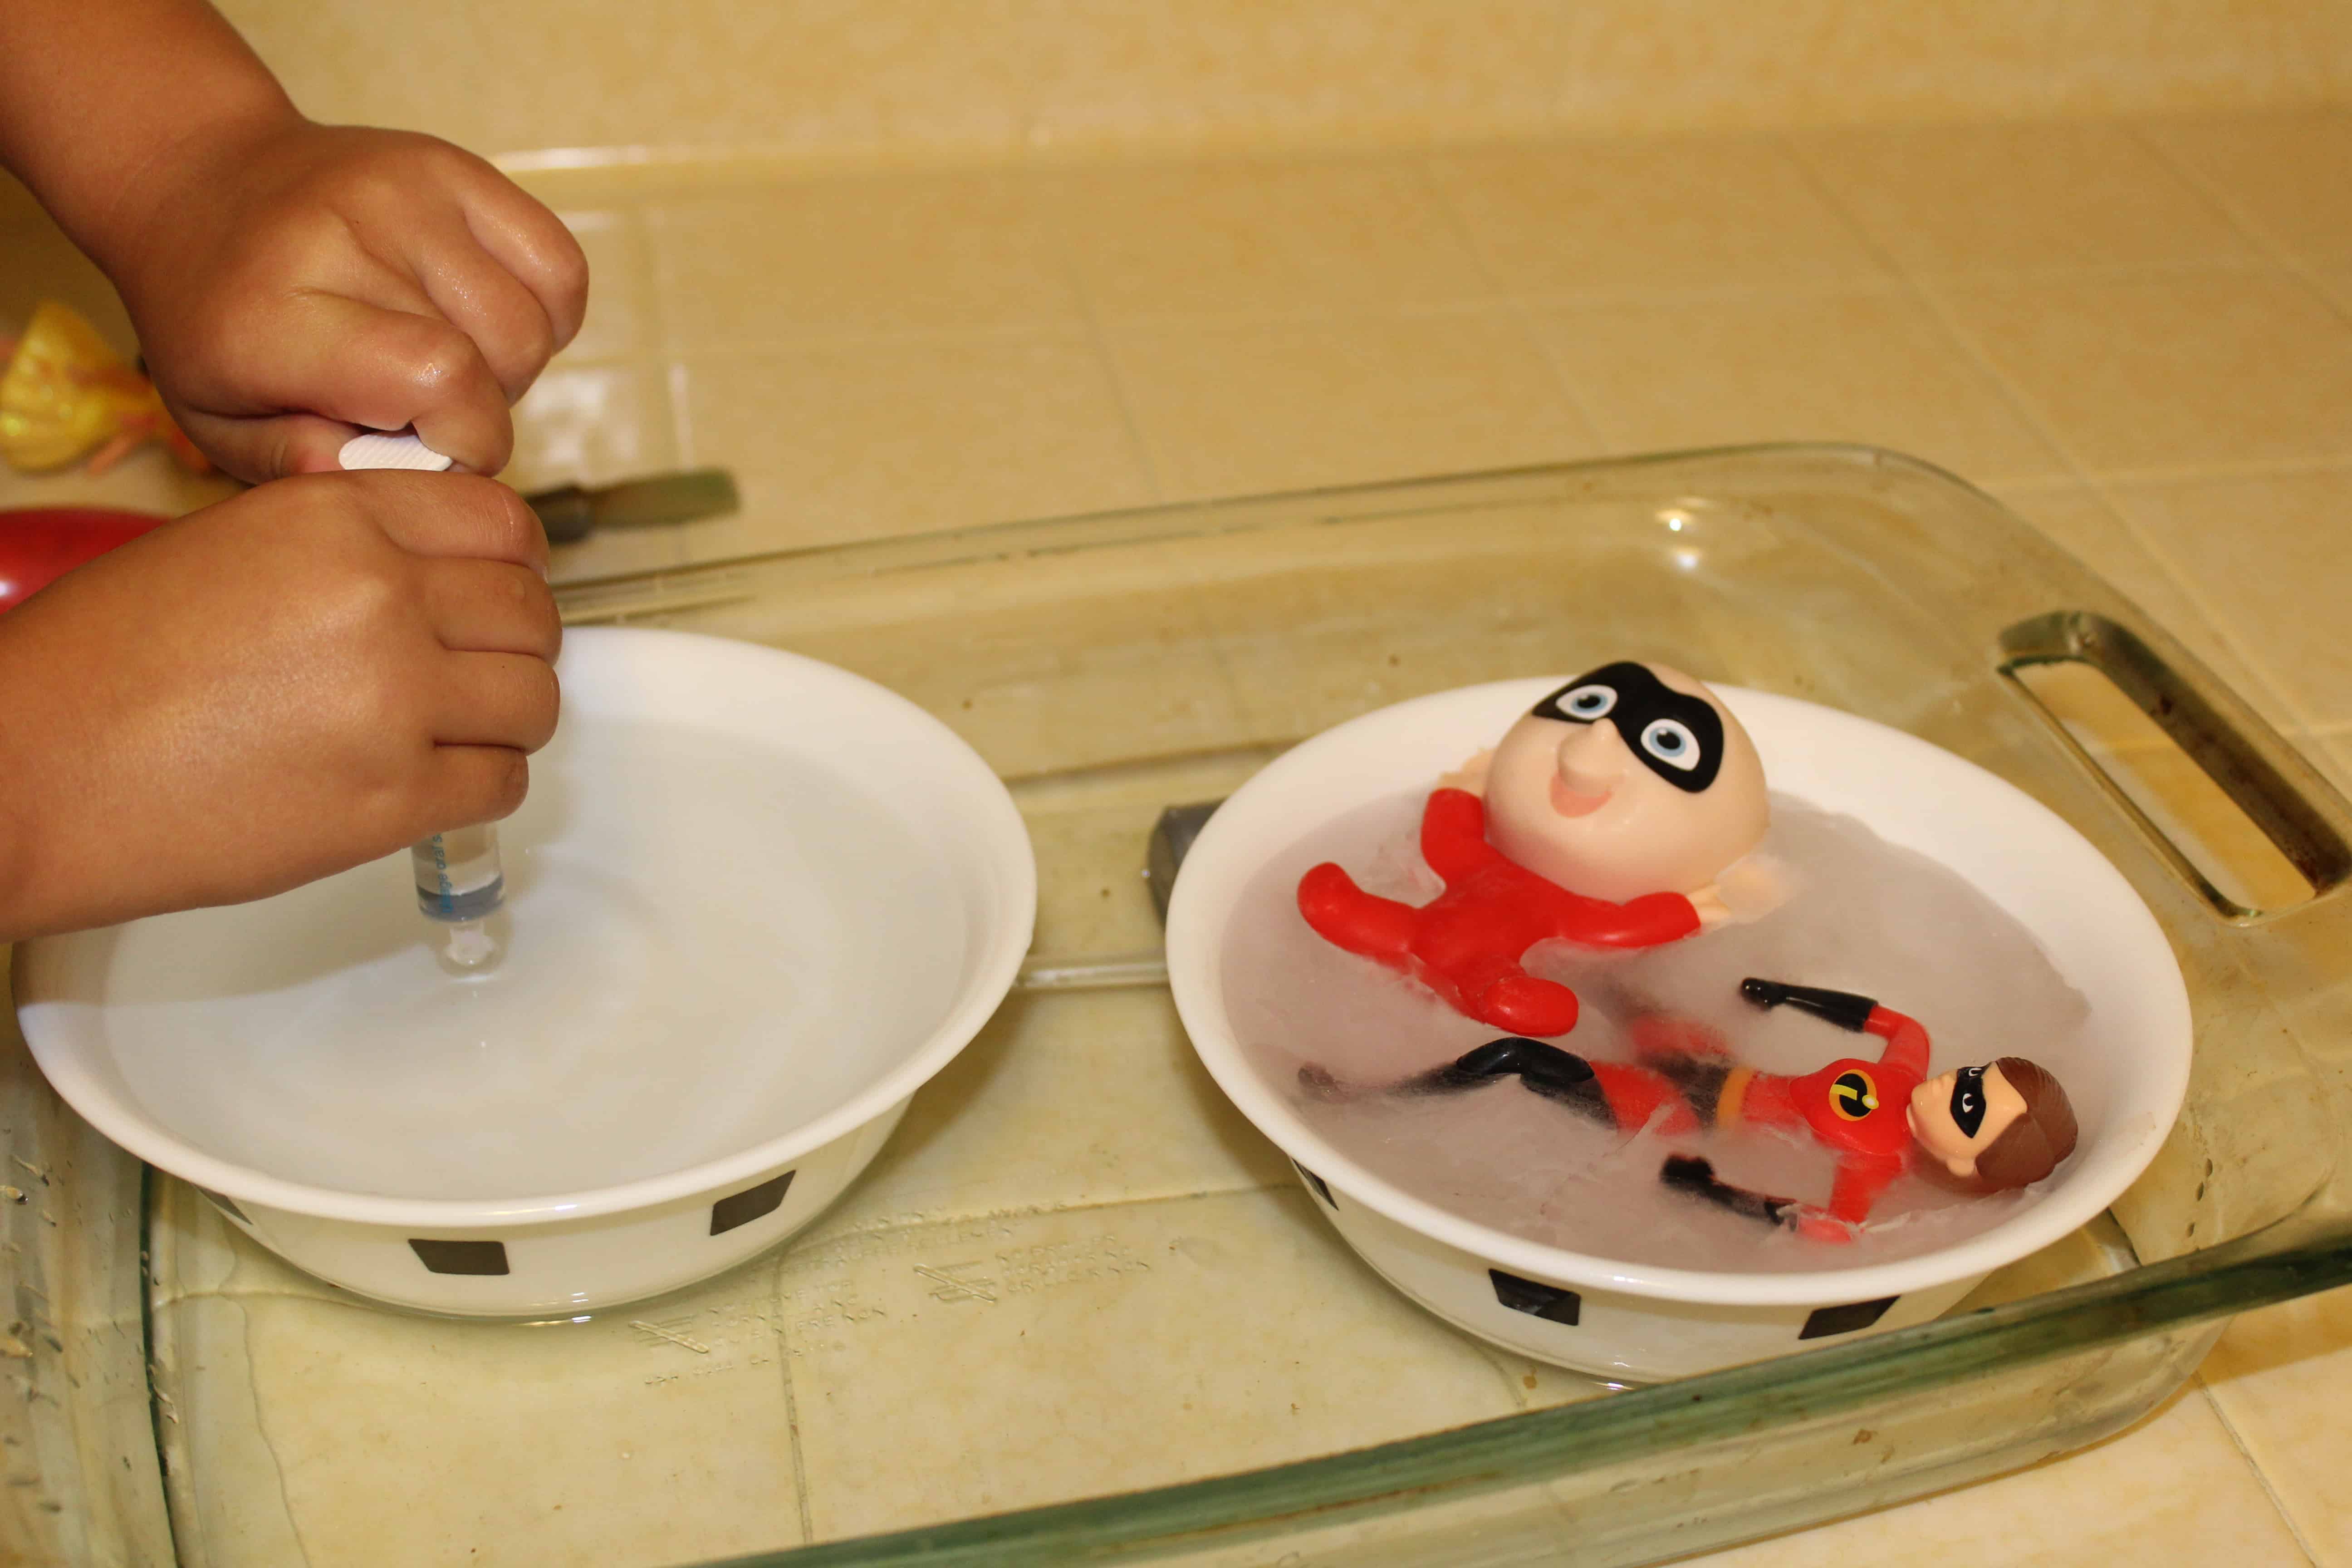 Child practicing with syringe to gather warm water from one bowl to put in the other bowl.